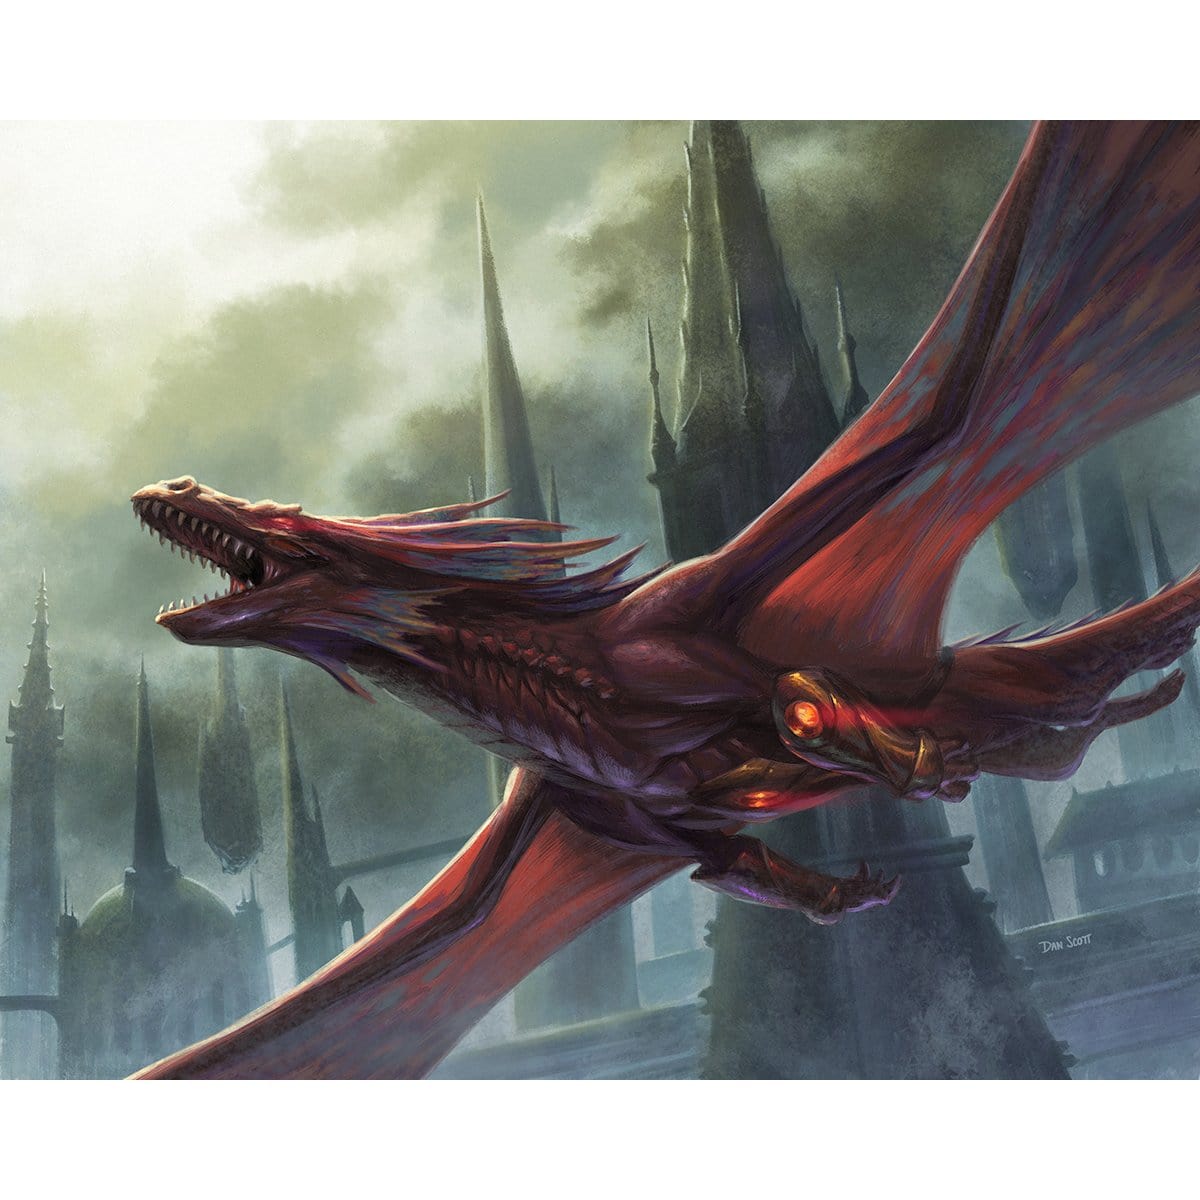 Hypersonic Dragon Print - Print - Original Magic Art - Accessories for Magic the Gathering and other card games